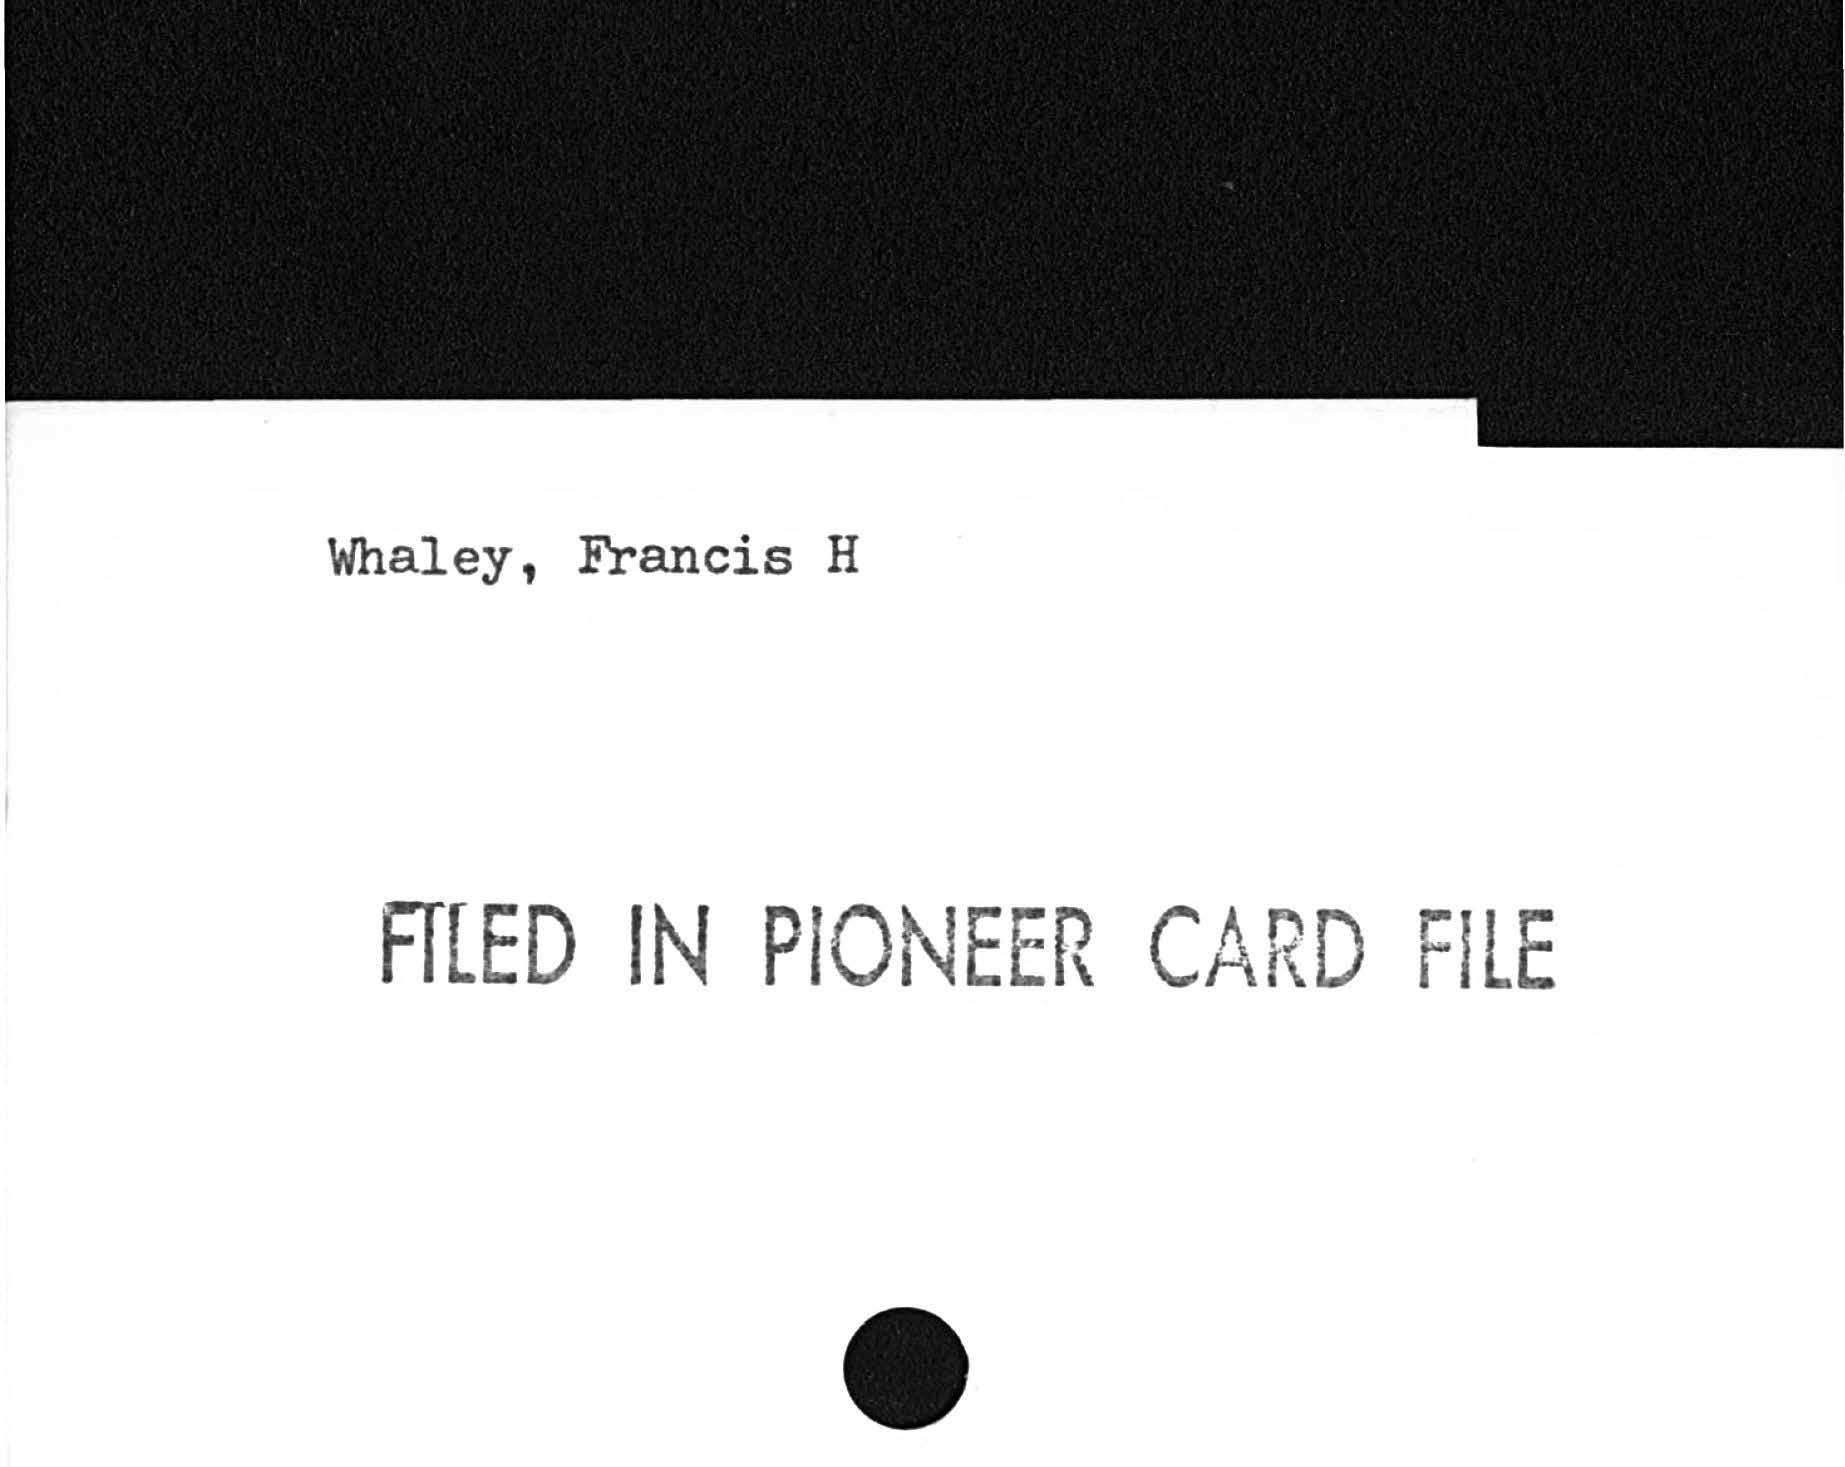 Whaley, Francis HFILED IN PIONEER CARD FILED